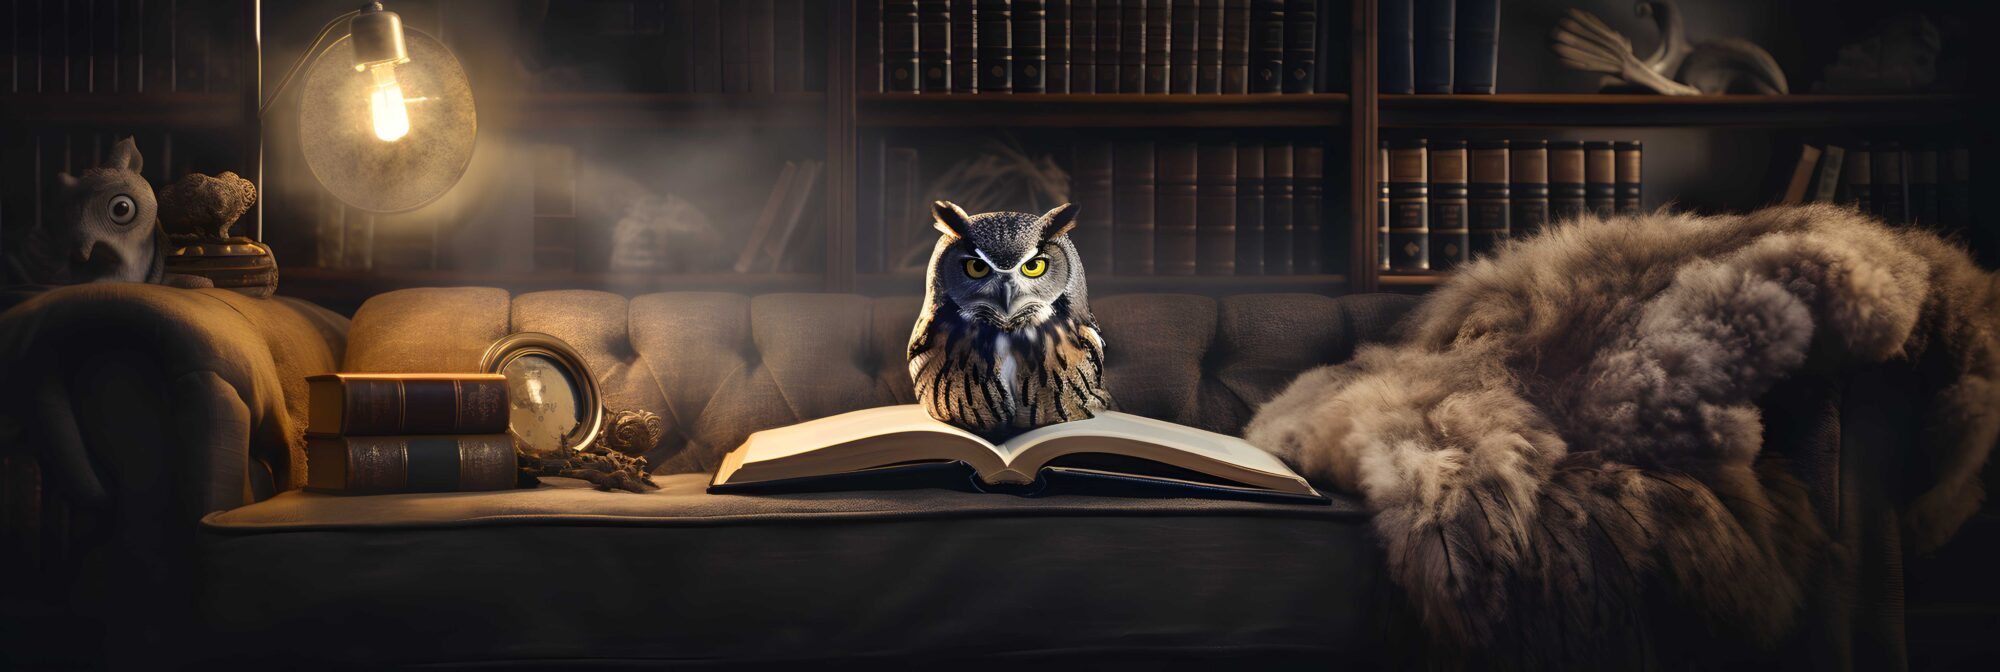 Owl On Book